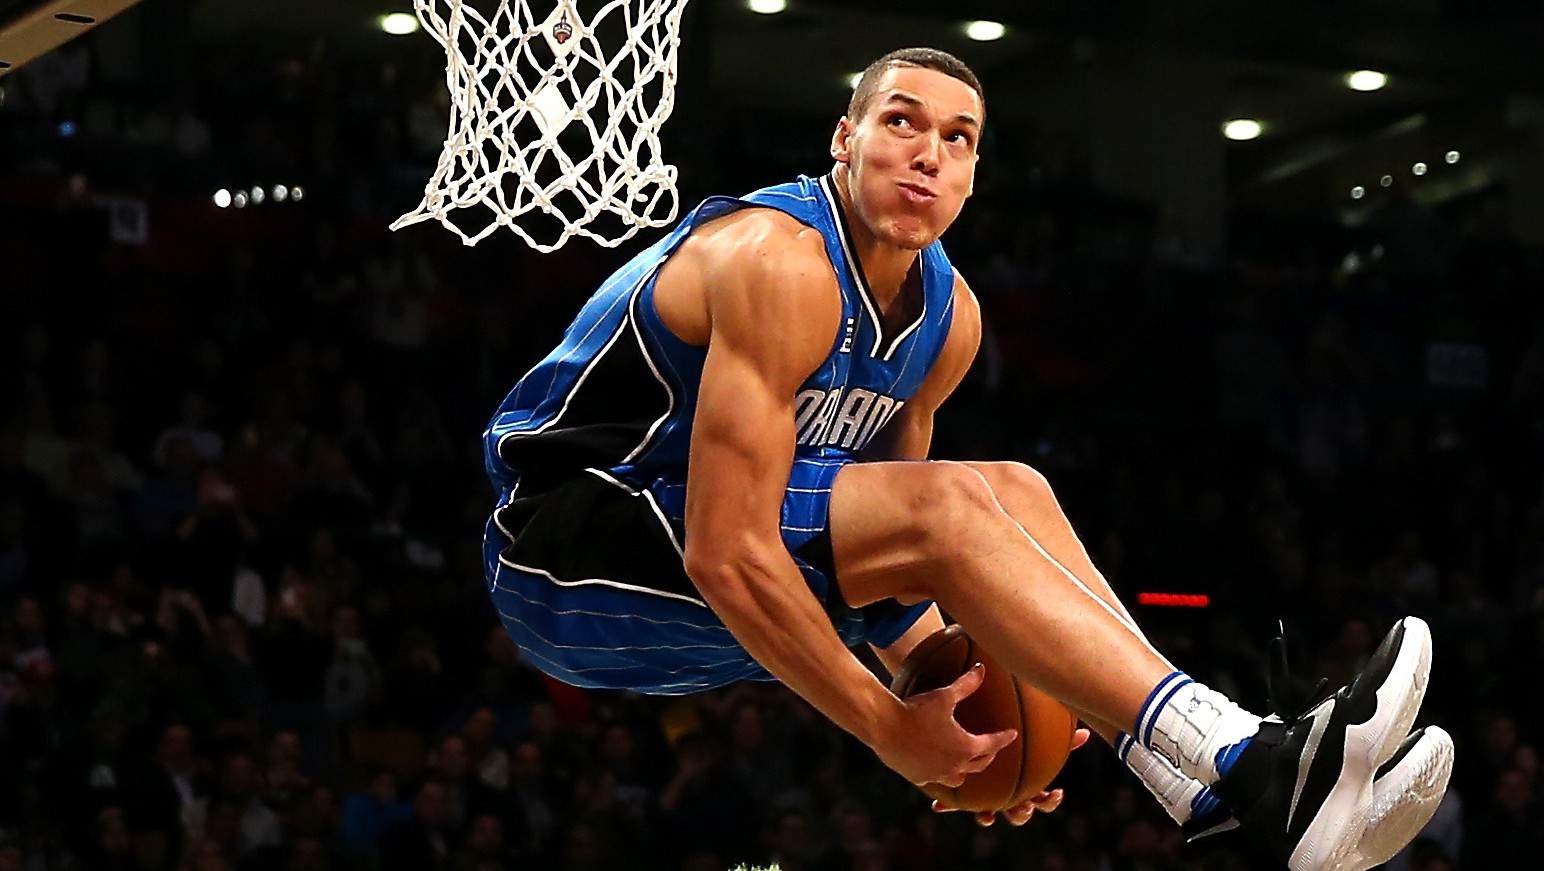 Slam Dunk Contest 2016: The Picture You Need to See